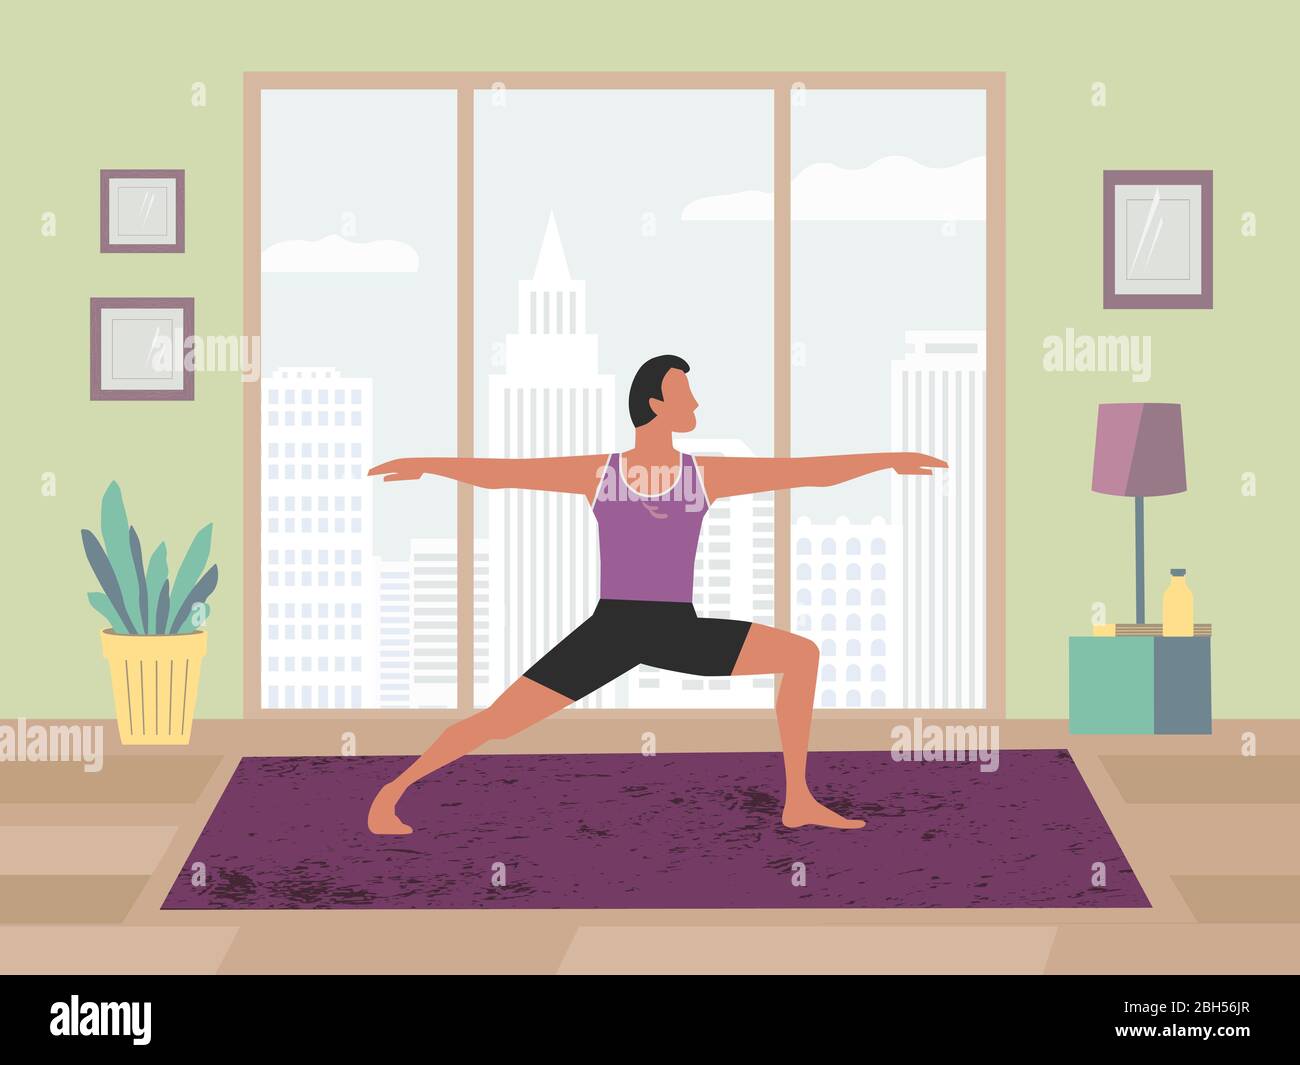 Man exercising yoga at home flat color vector. Stay at home yoga meditation practice cartoon. Breathing exercise workout background. Healthy lifestyle Stock Vector